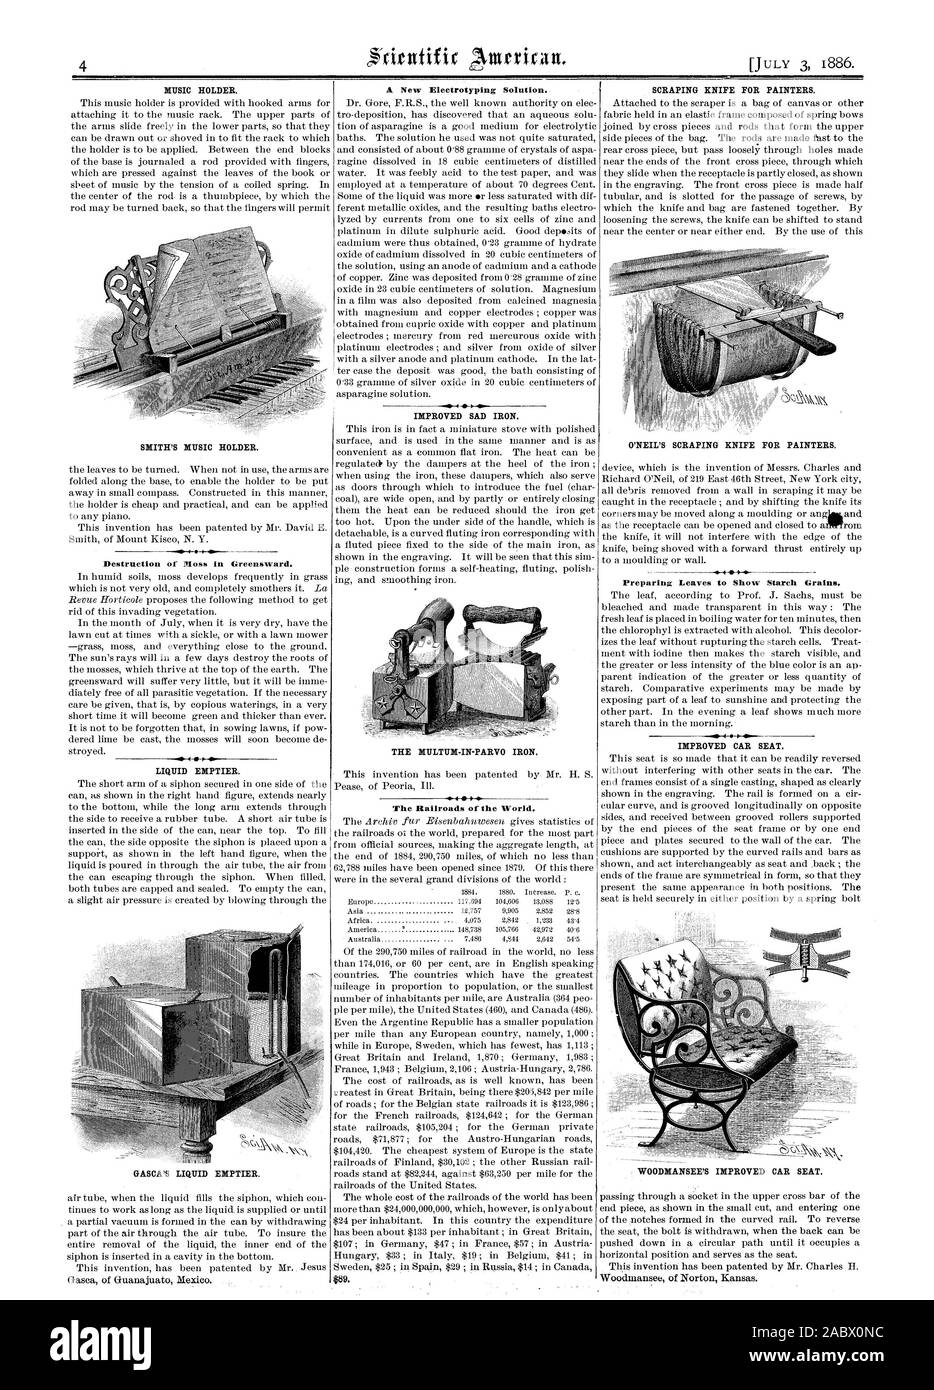 entifir Aintrican. MUSIC HOLDER. Destruction of Moss in Greensward. LIQUID EMPTIER. A New Electrotyping Solution. IMPROVED SAD IRON. The Railroads of the World. SCRAPING KNIFE FOR PAINTERS. Preparing Leaves to Show Starch Grains. —a I  IMPROVED CAR SEAT. WOODBIANSEE'S IMPROVED CAR SEAT., scientific american, 1886-07-03 Stock Photo